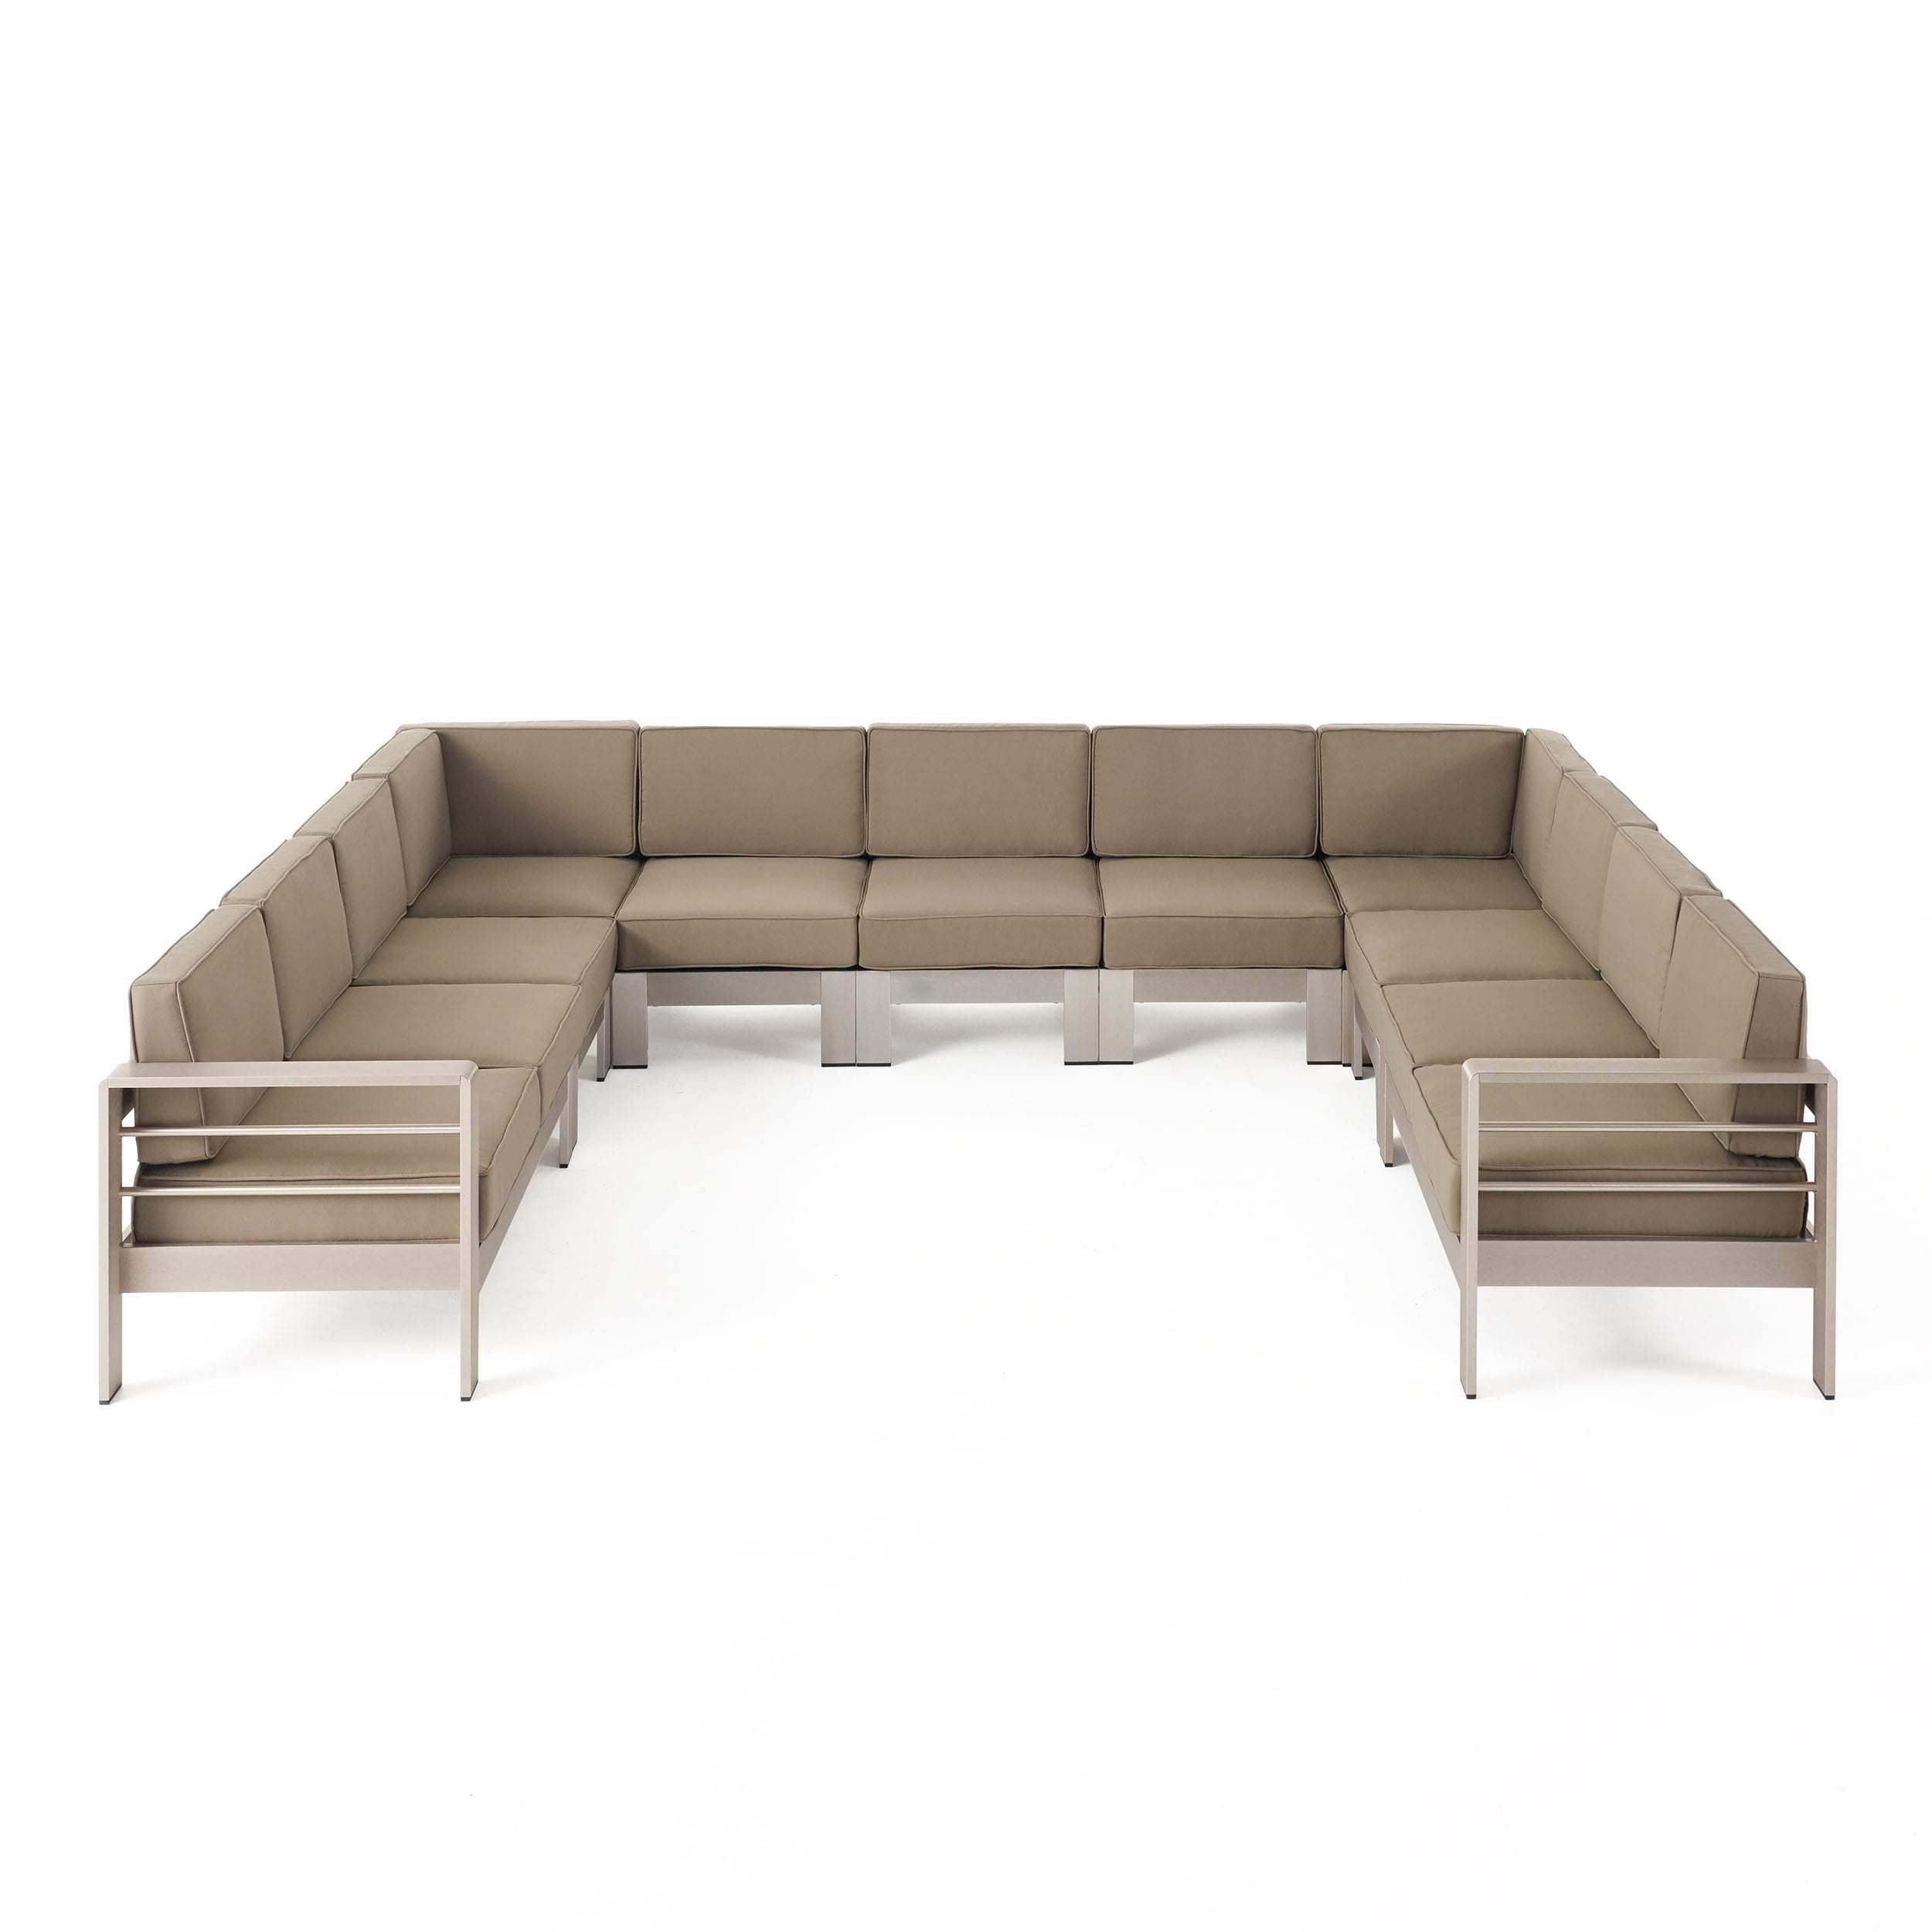 Cape Coral Outdoor 11 Seater Aluminum U-Shaped Sofa Sectional by Christopher Knight Home